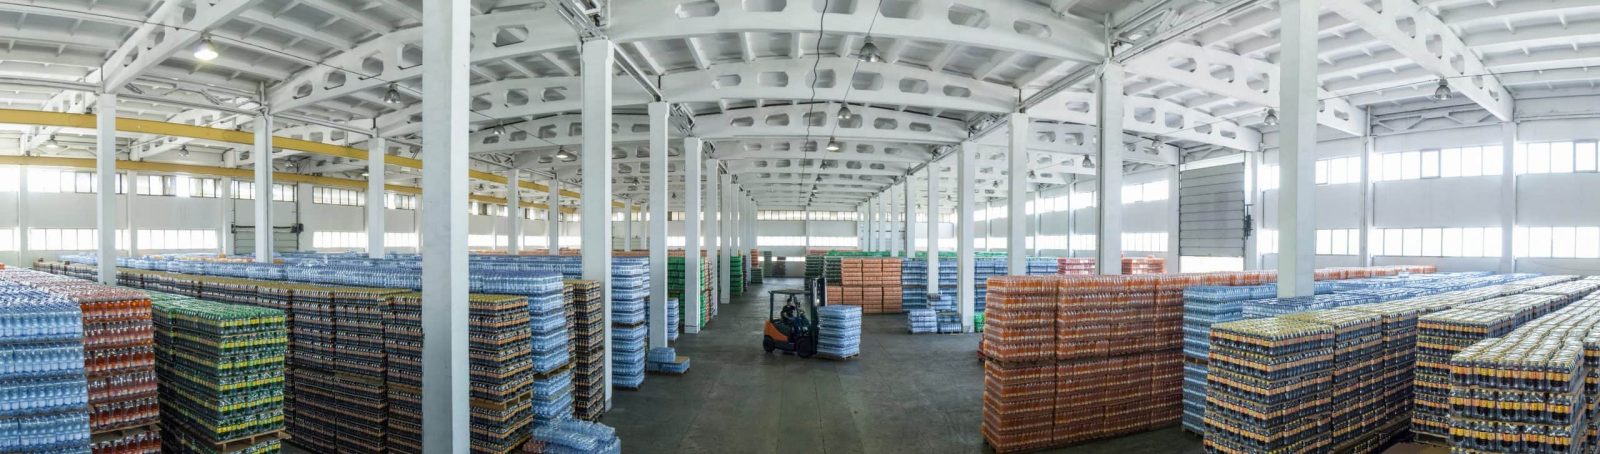 large warehouse with drinks